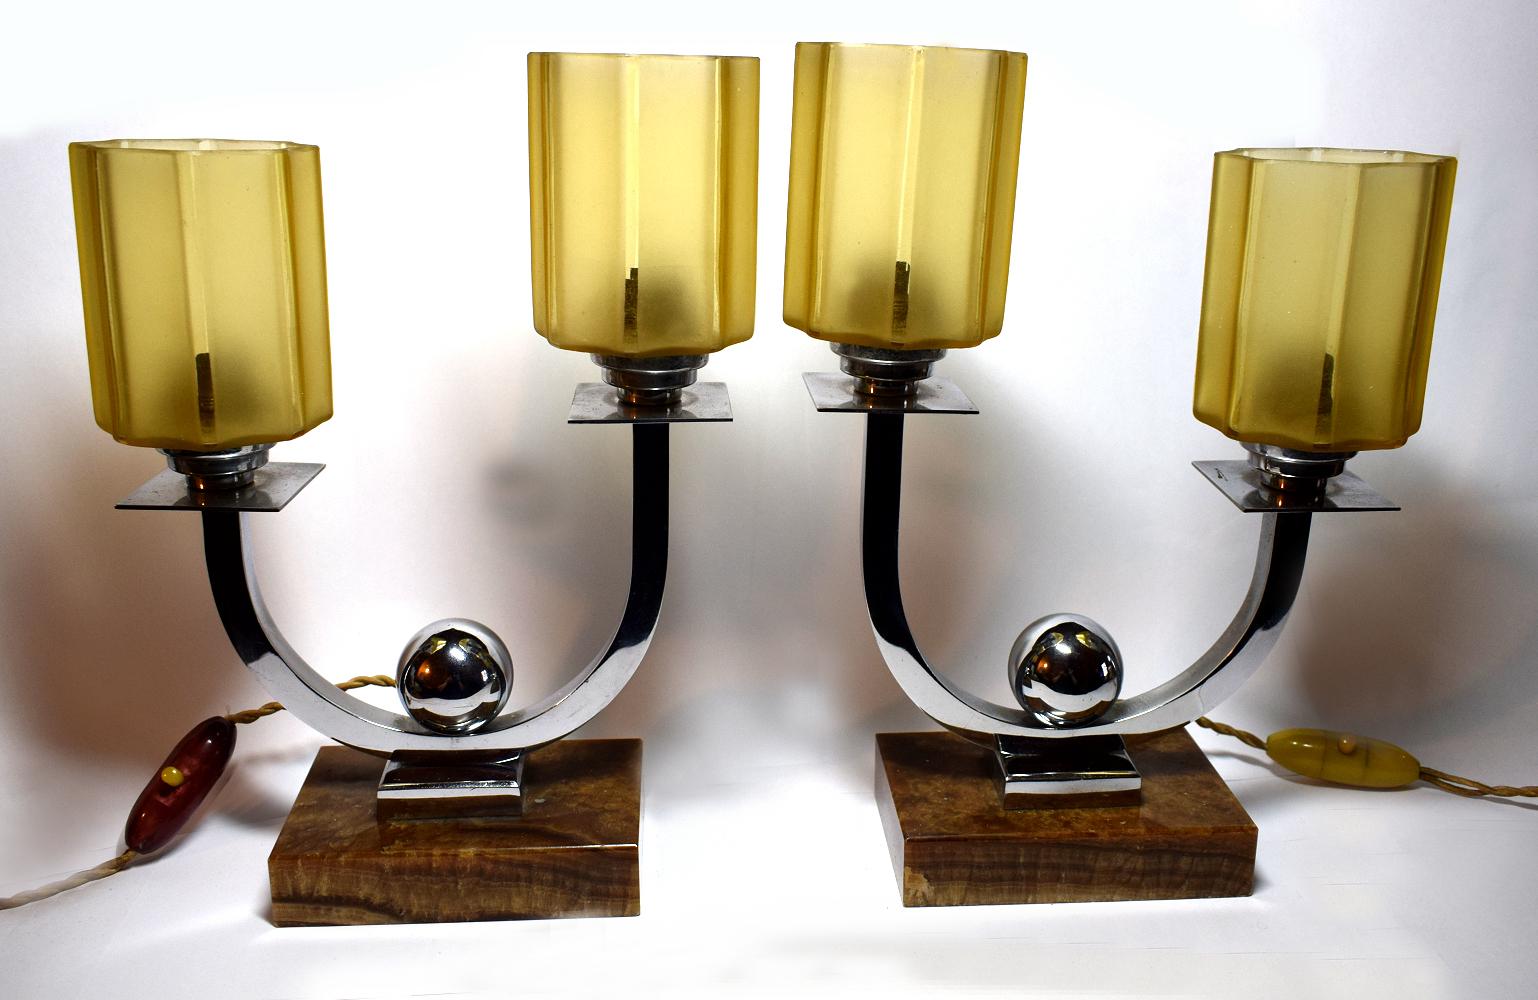 For your consideration are these matching pair of French Art Deco table lamps both dating to the 1930s. For anyone who has searched trying to find any period items in matching pairs is quite a feat and more so for these being in such good condition.